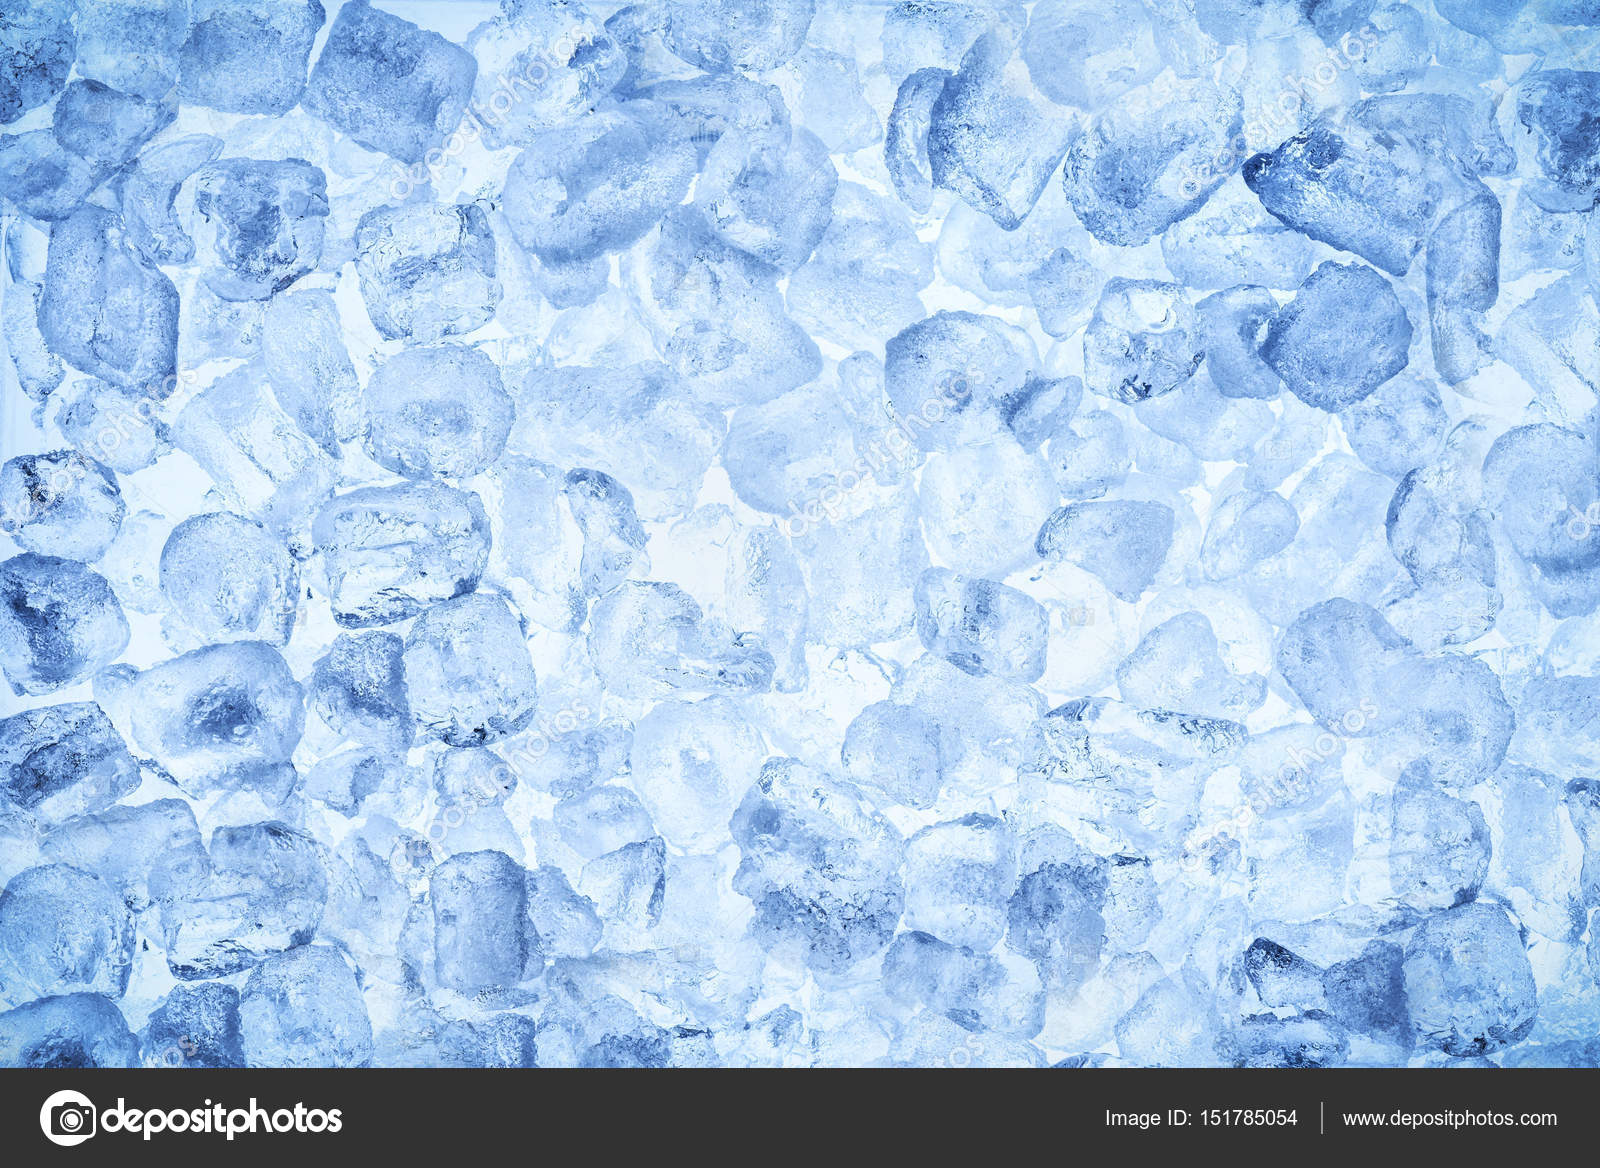 Real Cool Ice Cube Frozen Background Stock Photo 97443626